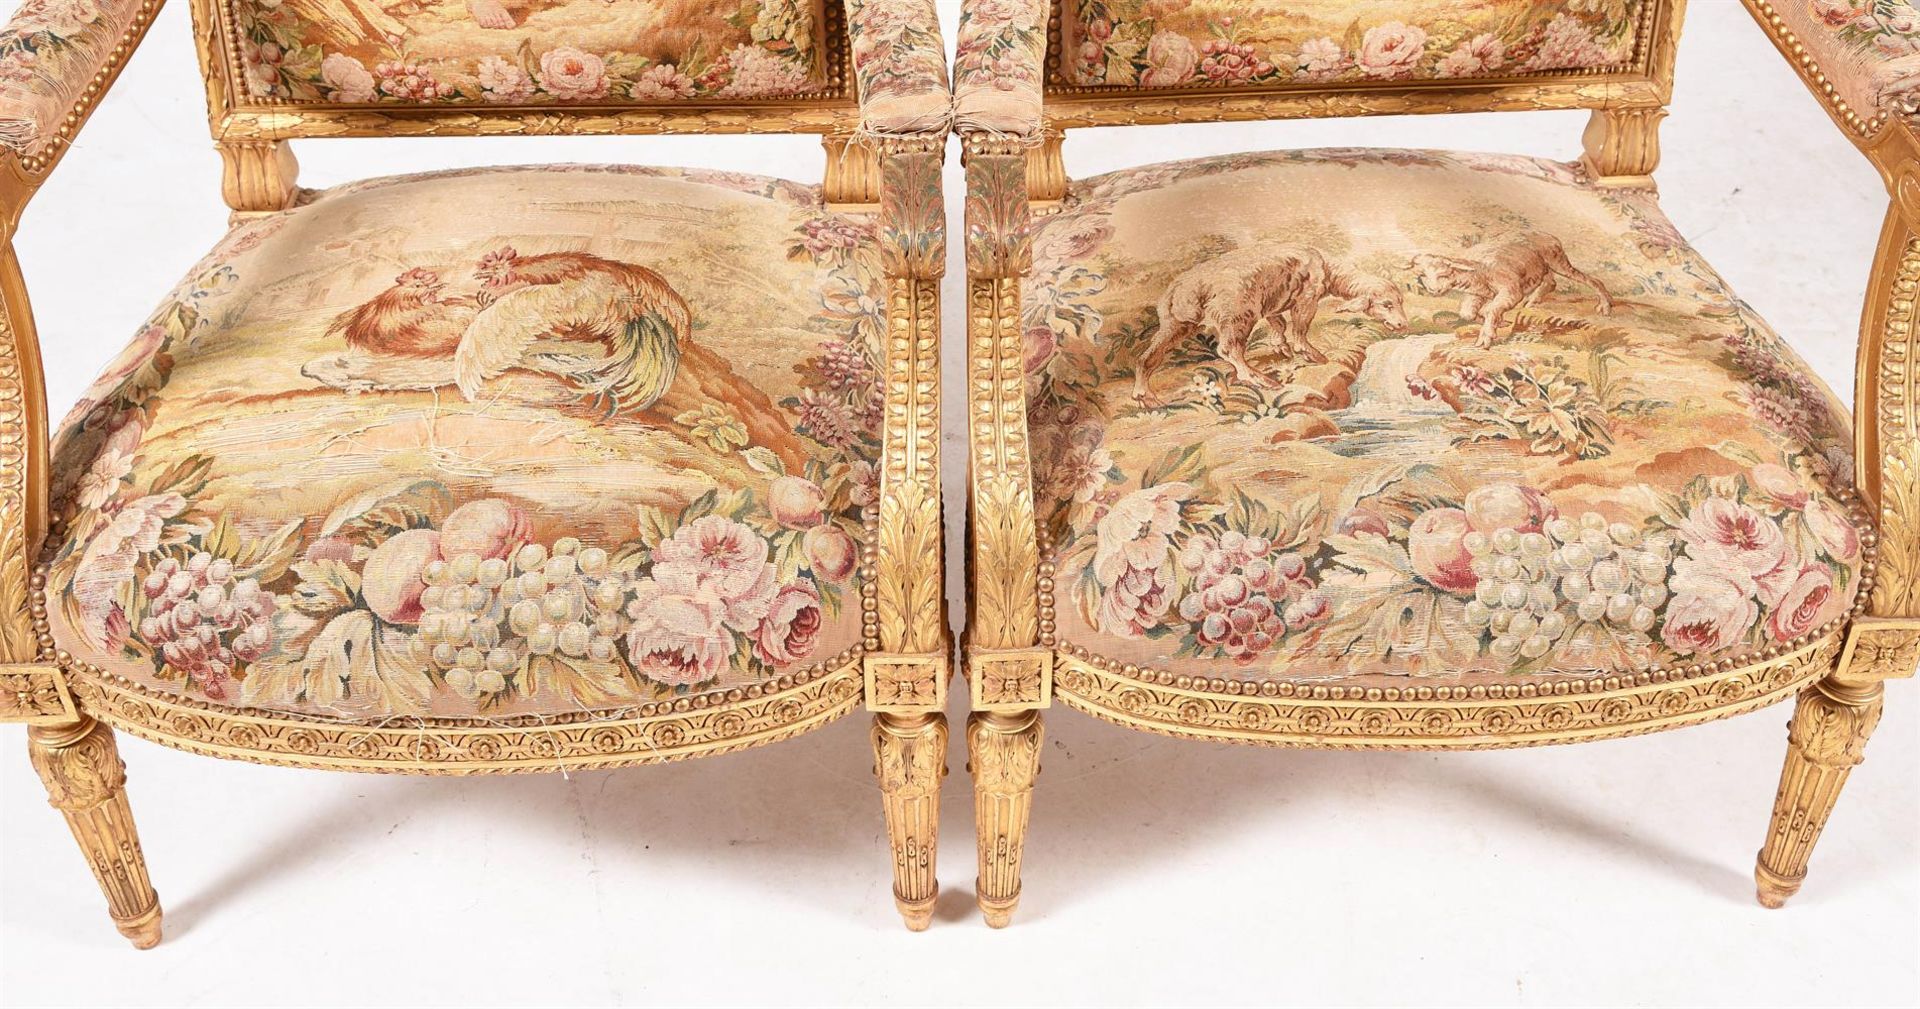 A FRENCH TRANSITIONAL AUBUSSON UPHOLSTERED GILTWOOD SALON SUITE, IN LOUIS XVI STYLE - Image 3 of 10